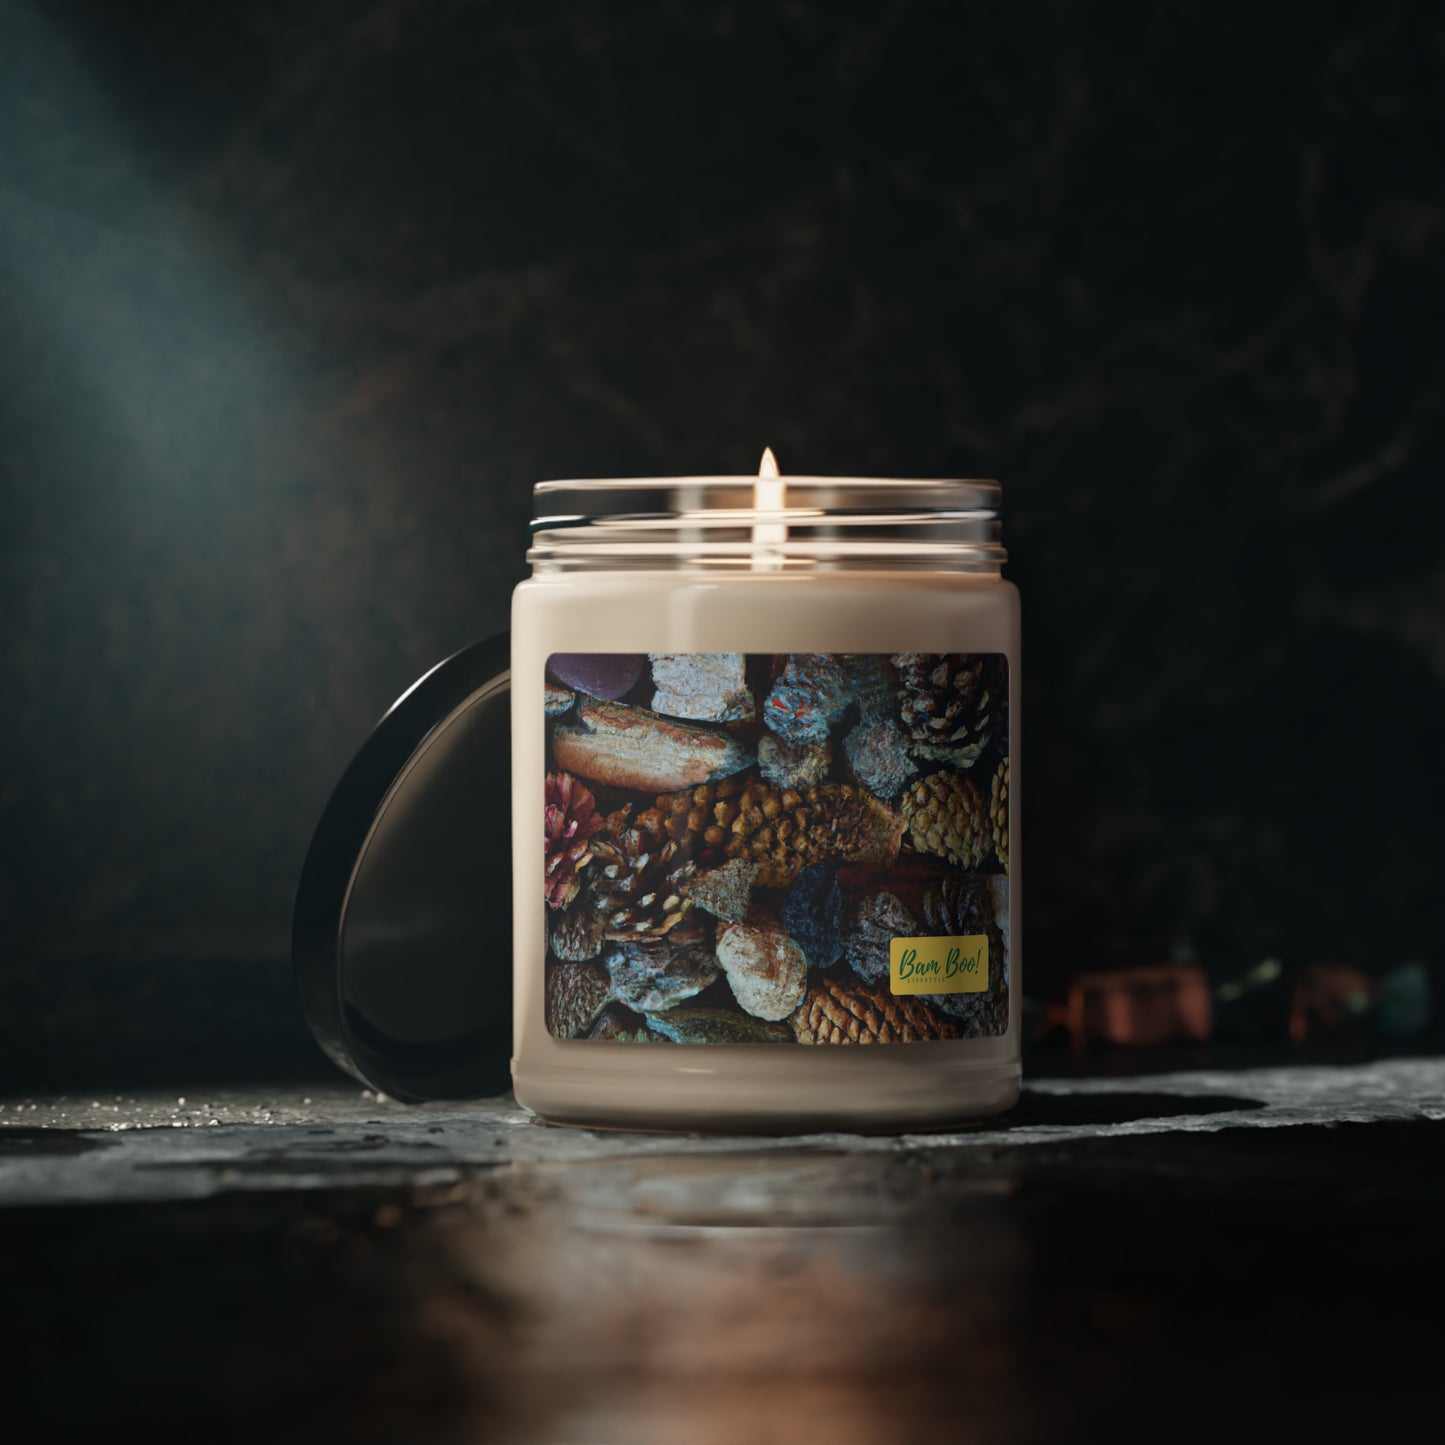 "Earthly Expressions: An Artistic Journey through Nature" - Bam Boo! Lifestyle Eco-friendly Soy Candle